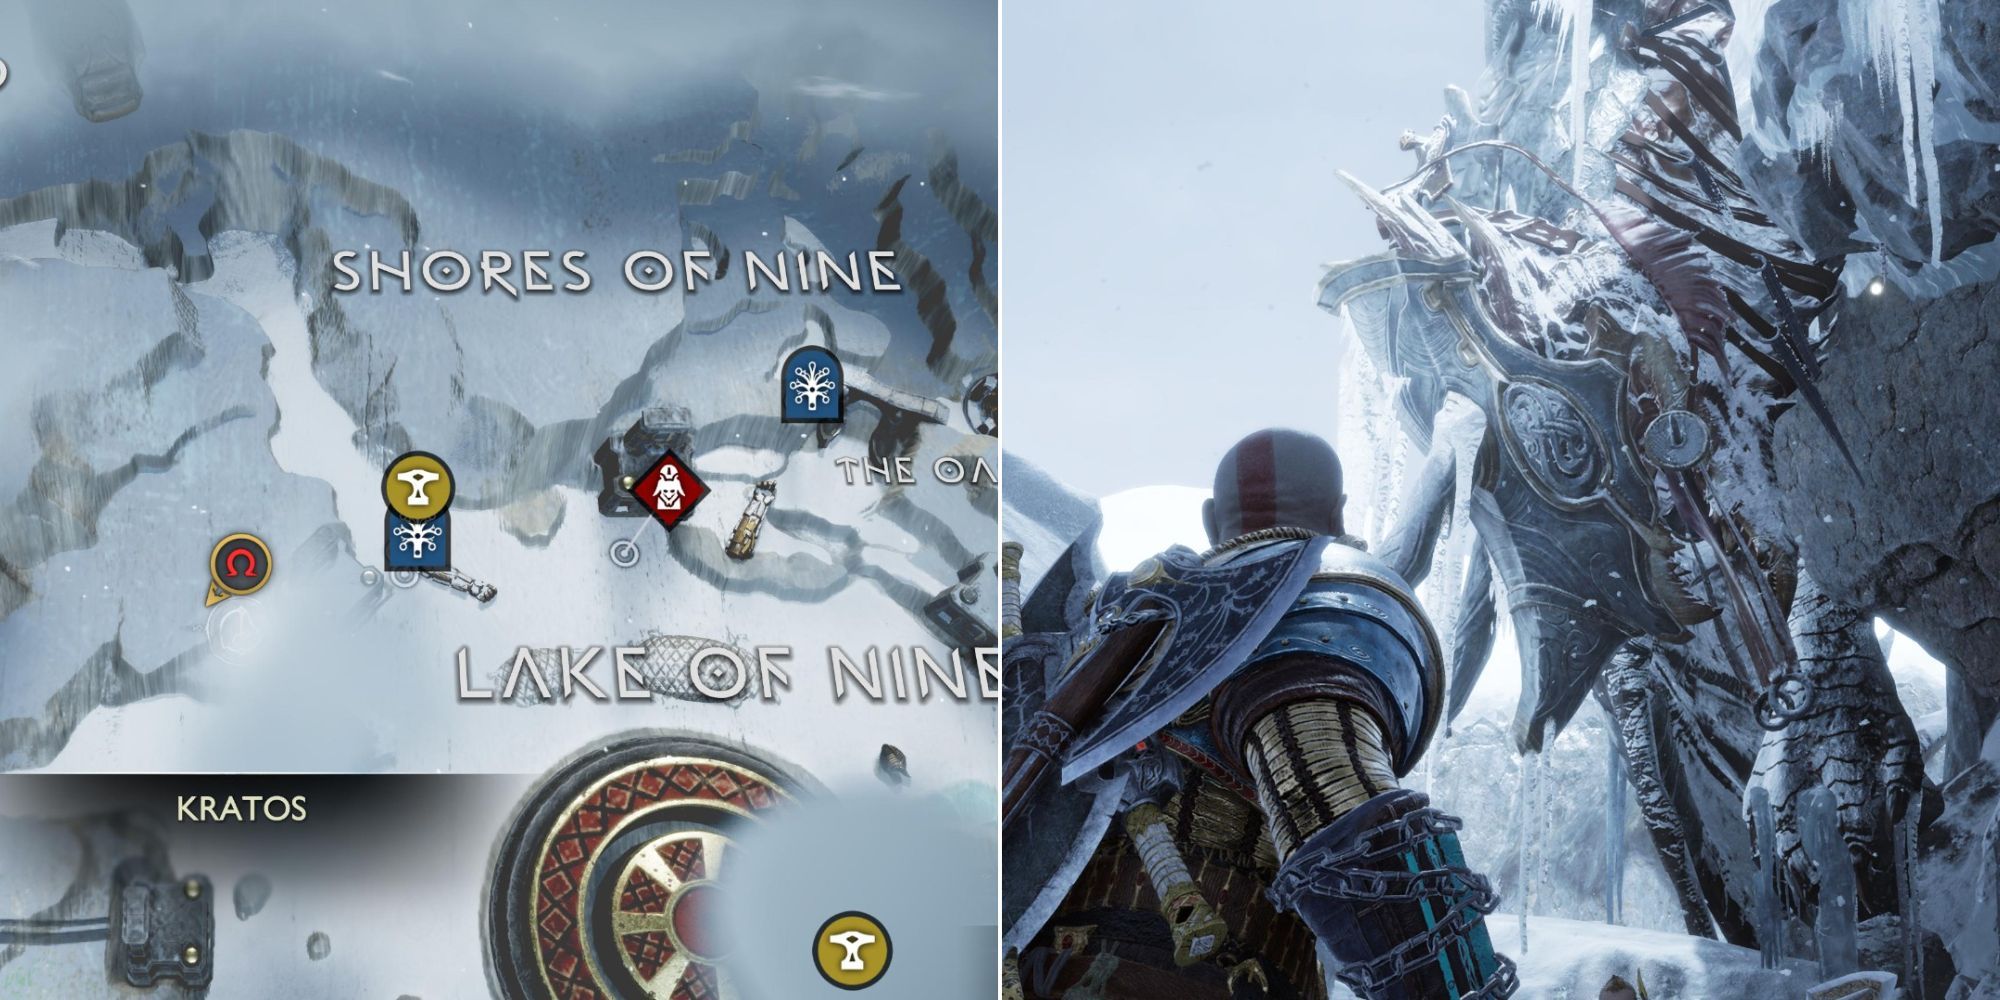 Two photos. The left one is a location at the Lake of Nine where you can find Baldur's mount. The right photo is Kratos looking up at the frozen mount.